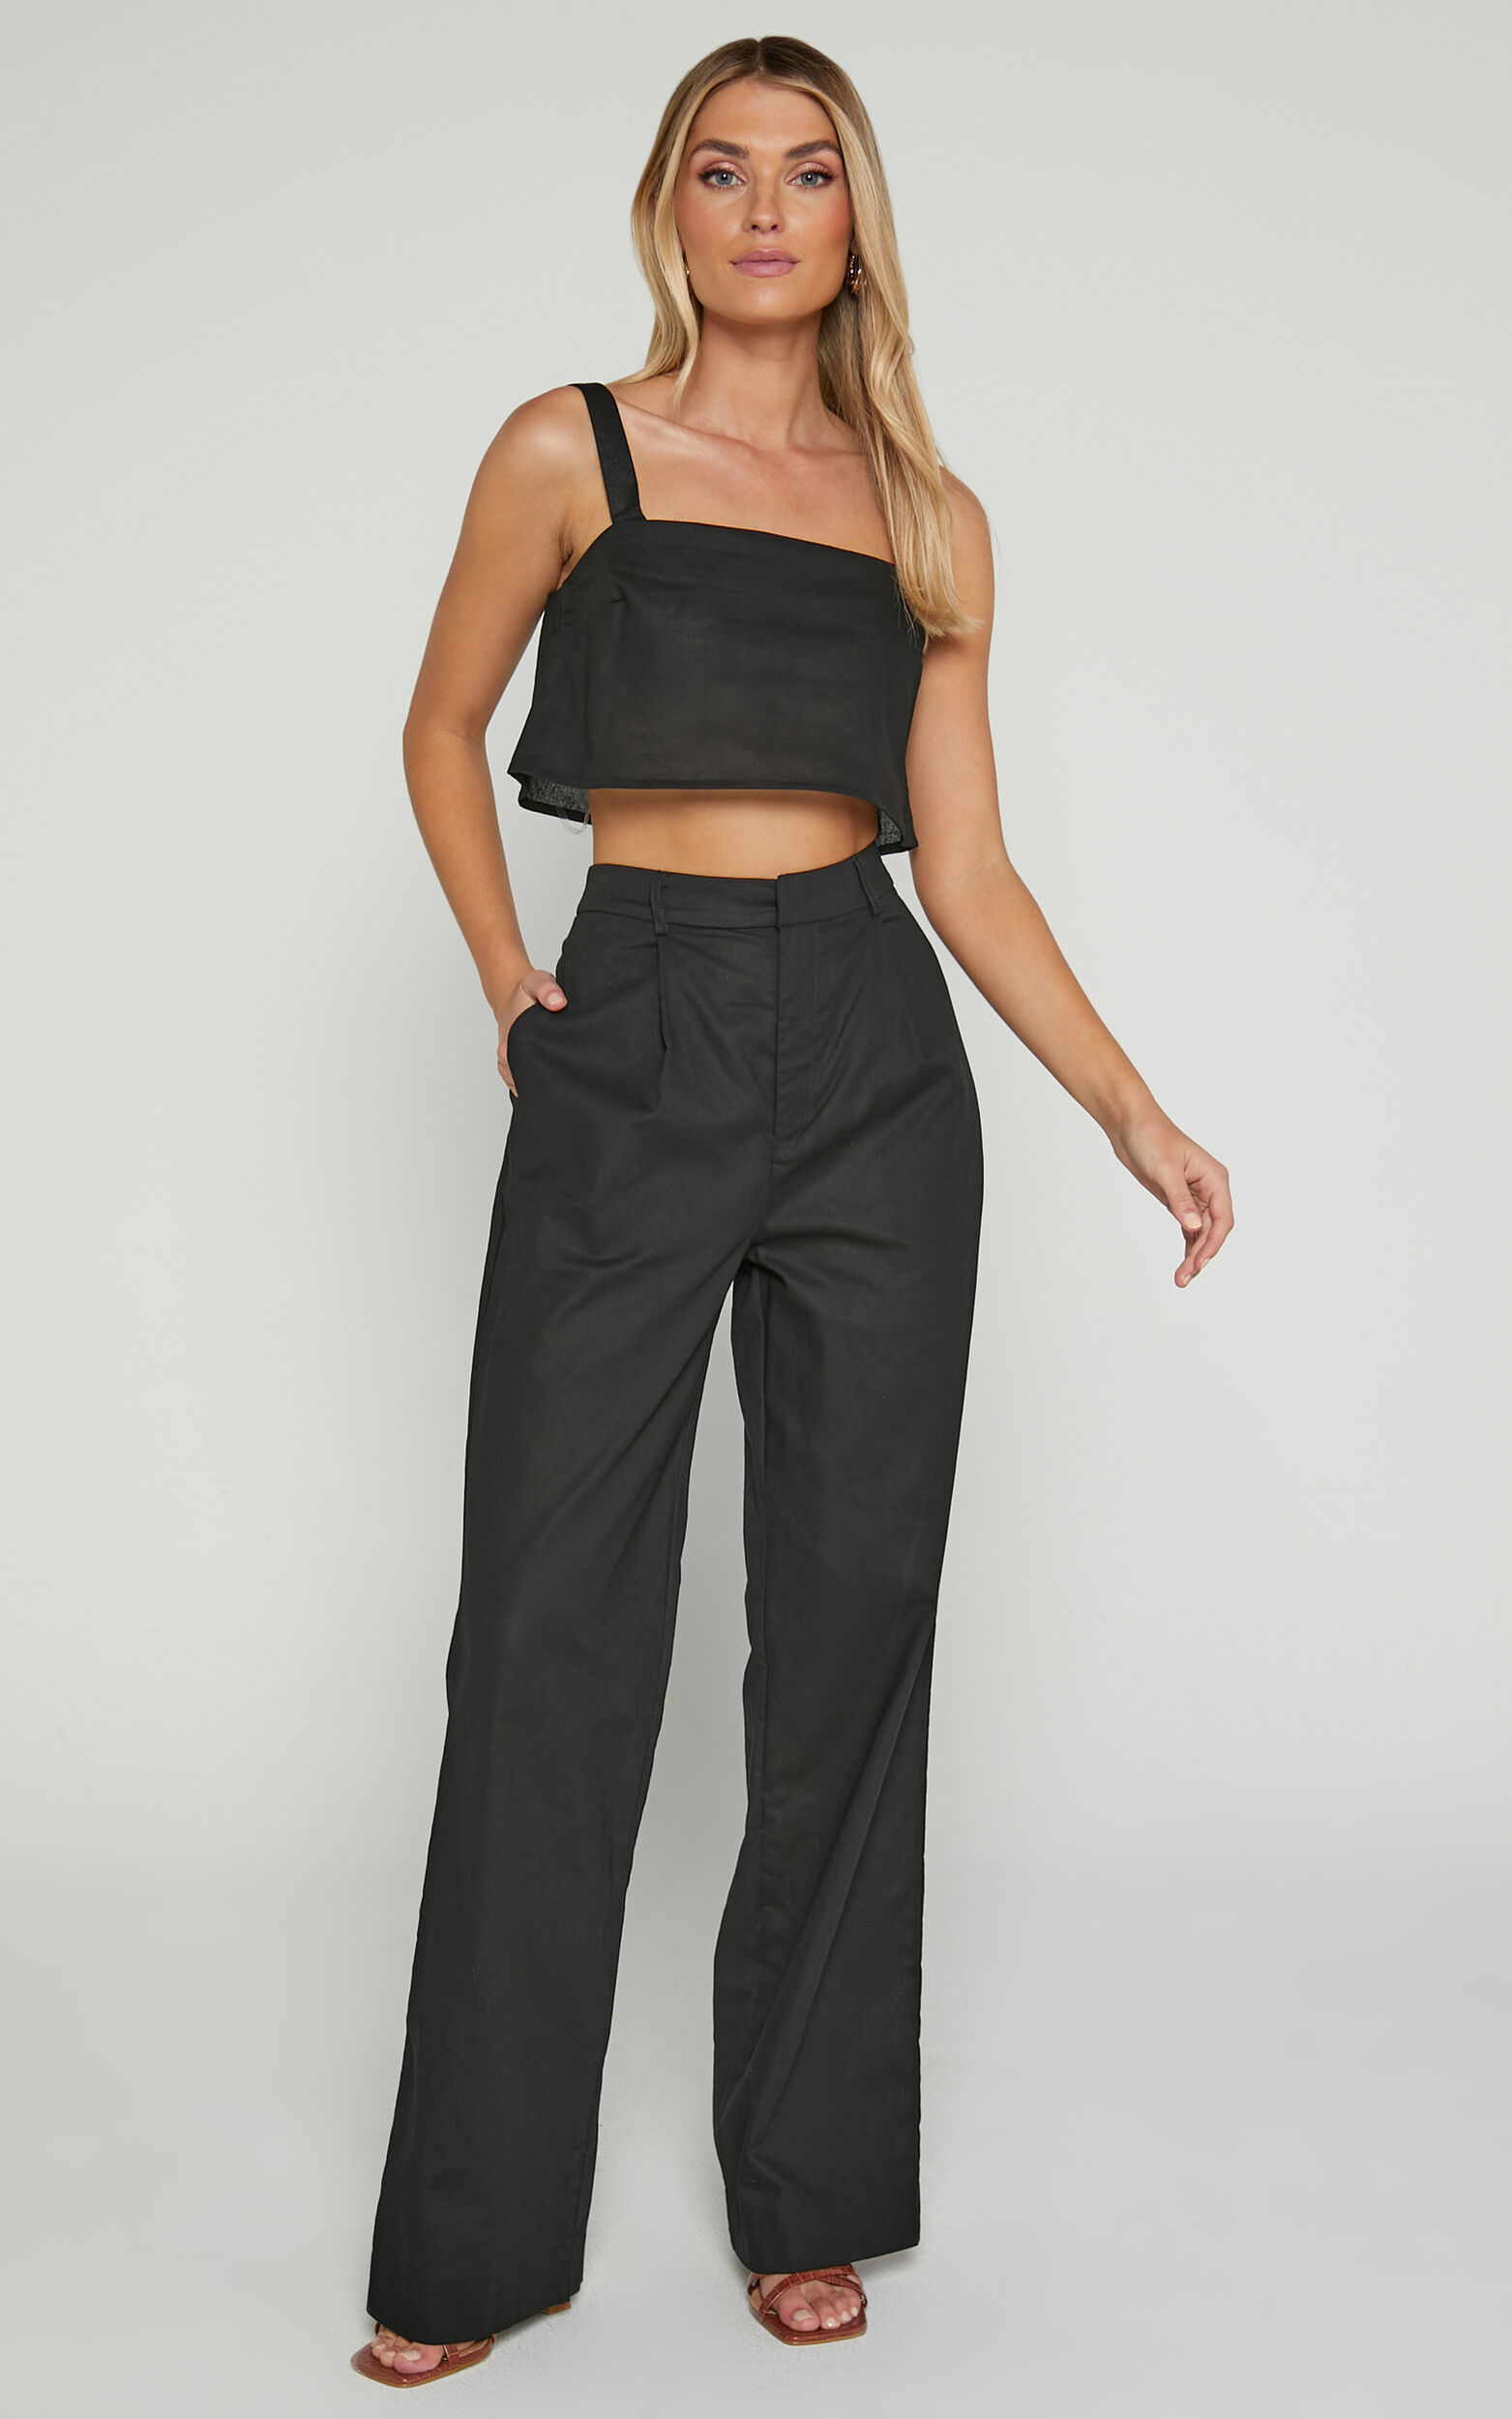 Claudina Two Piece Set - Cropped Cami Top and Relaxed Pants Set in Black - 04, BLK1